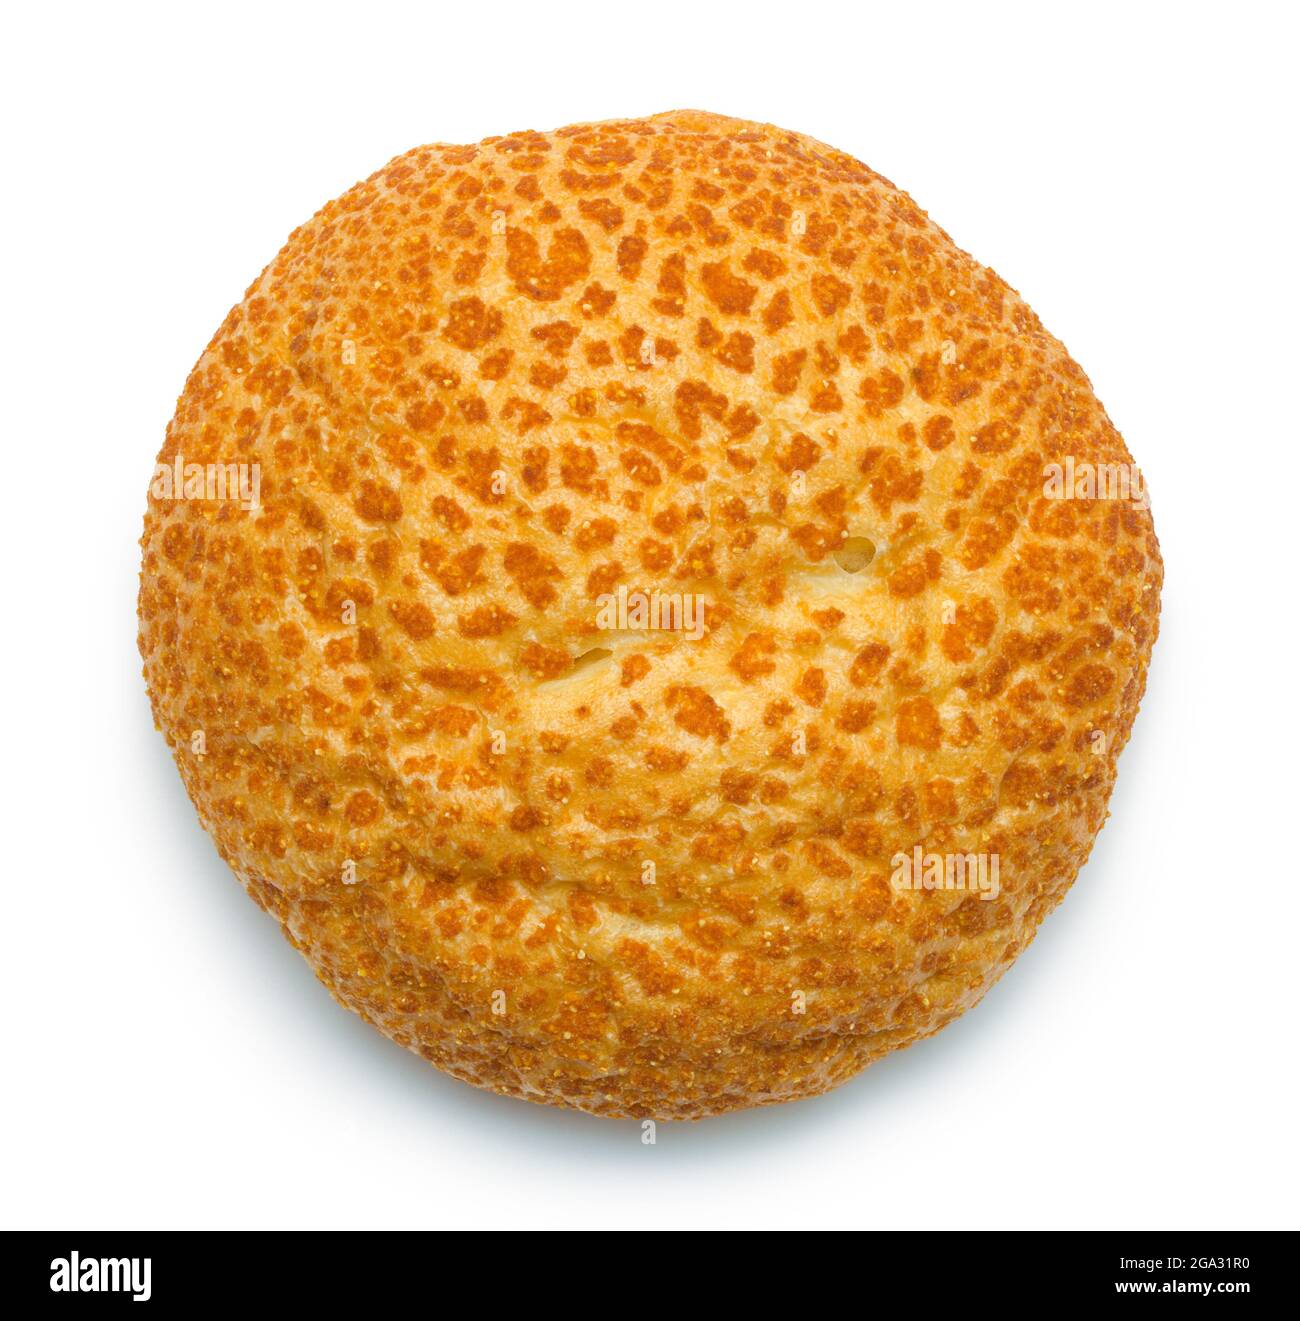 Bread Dinner Roll Top View Cut Out on White. Stock Photo